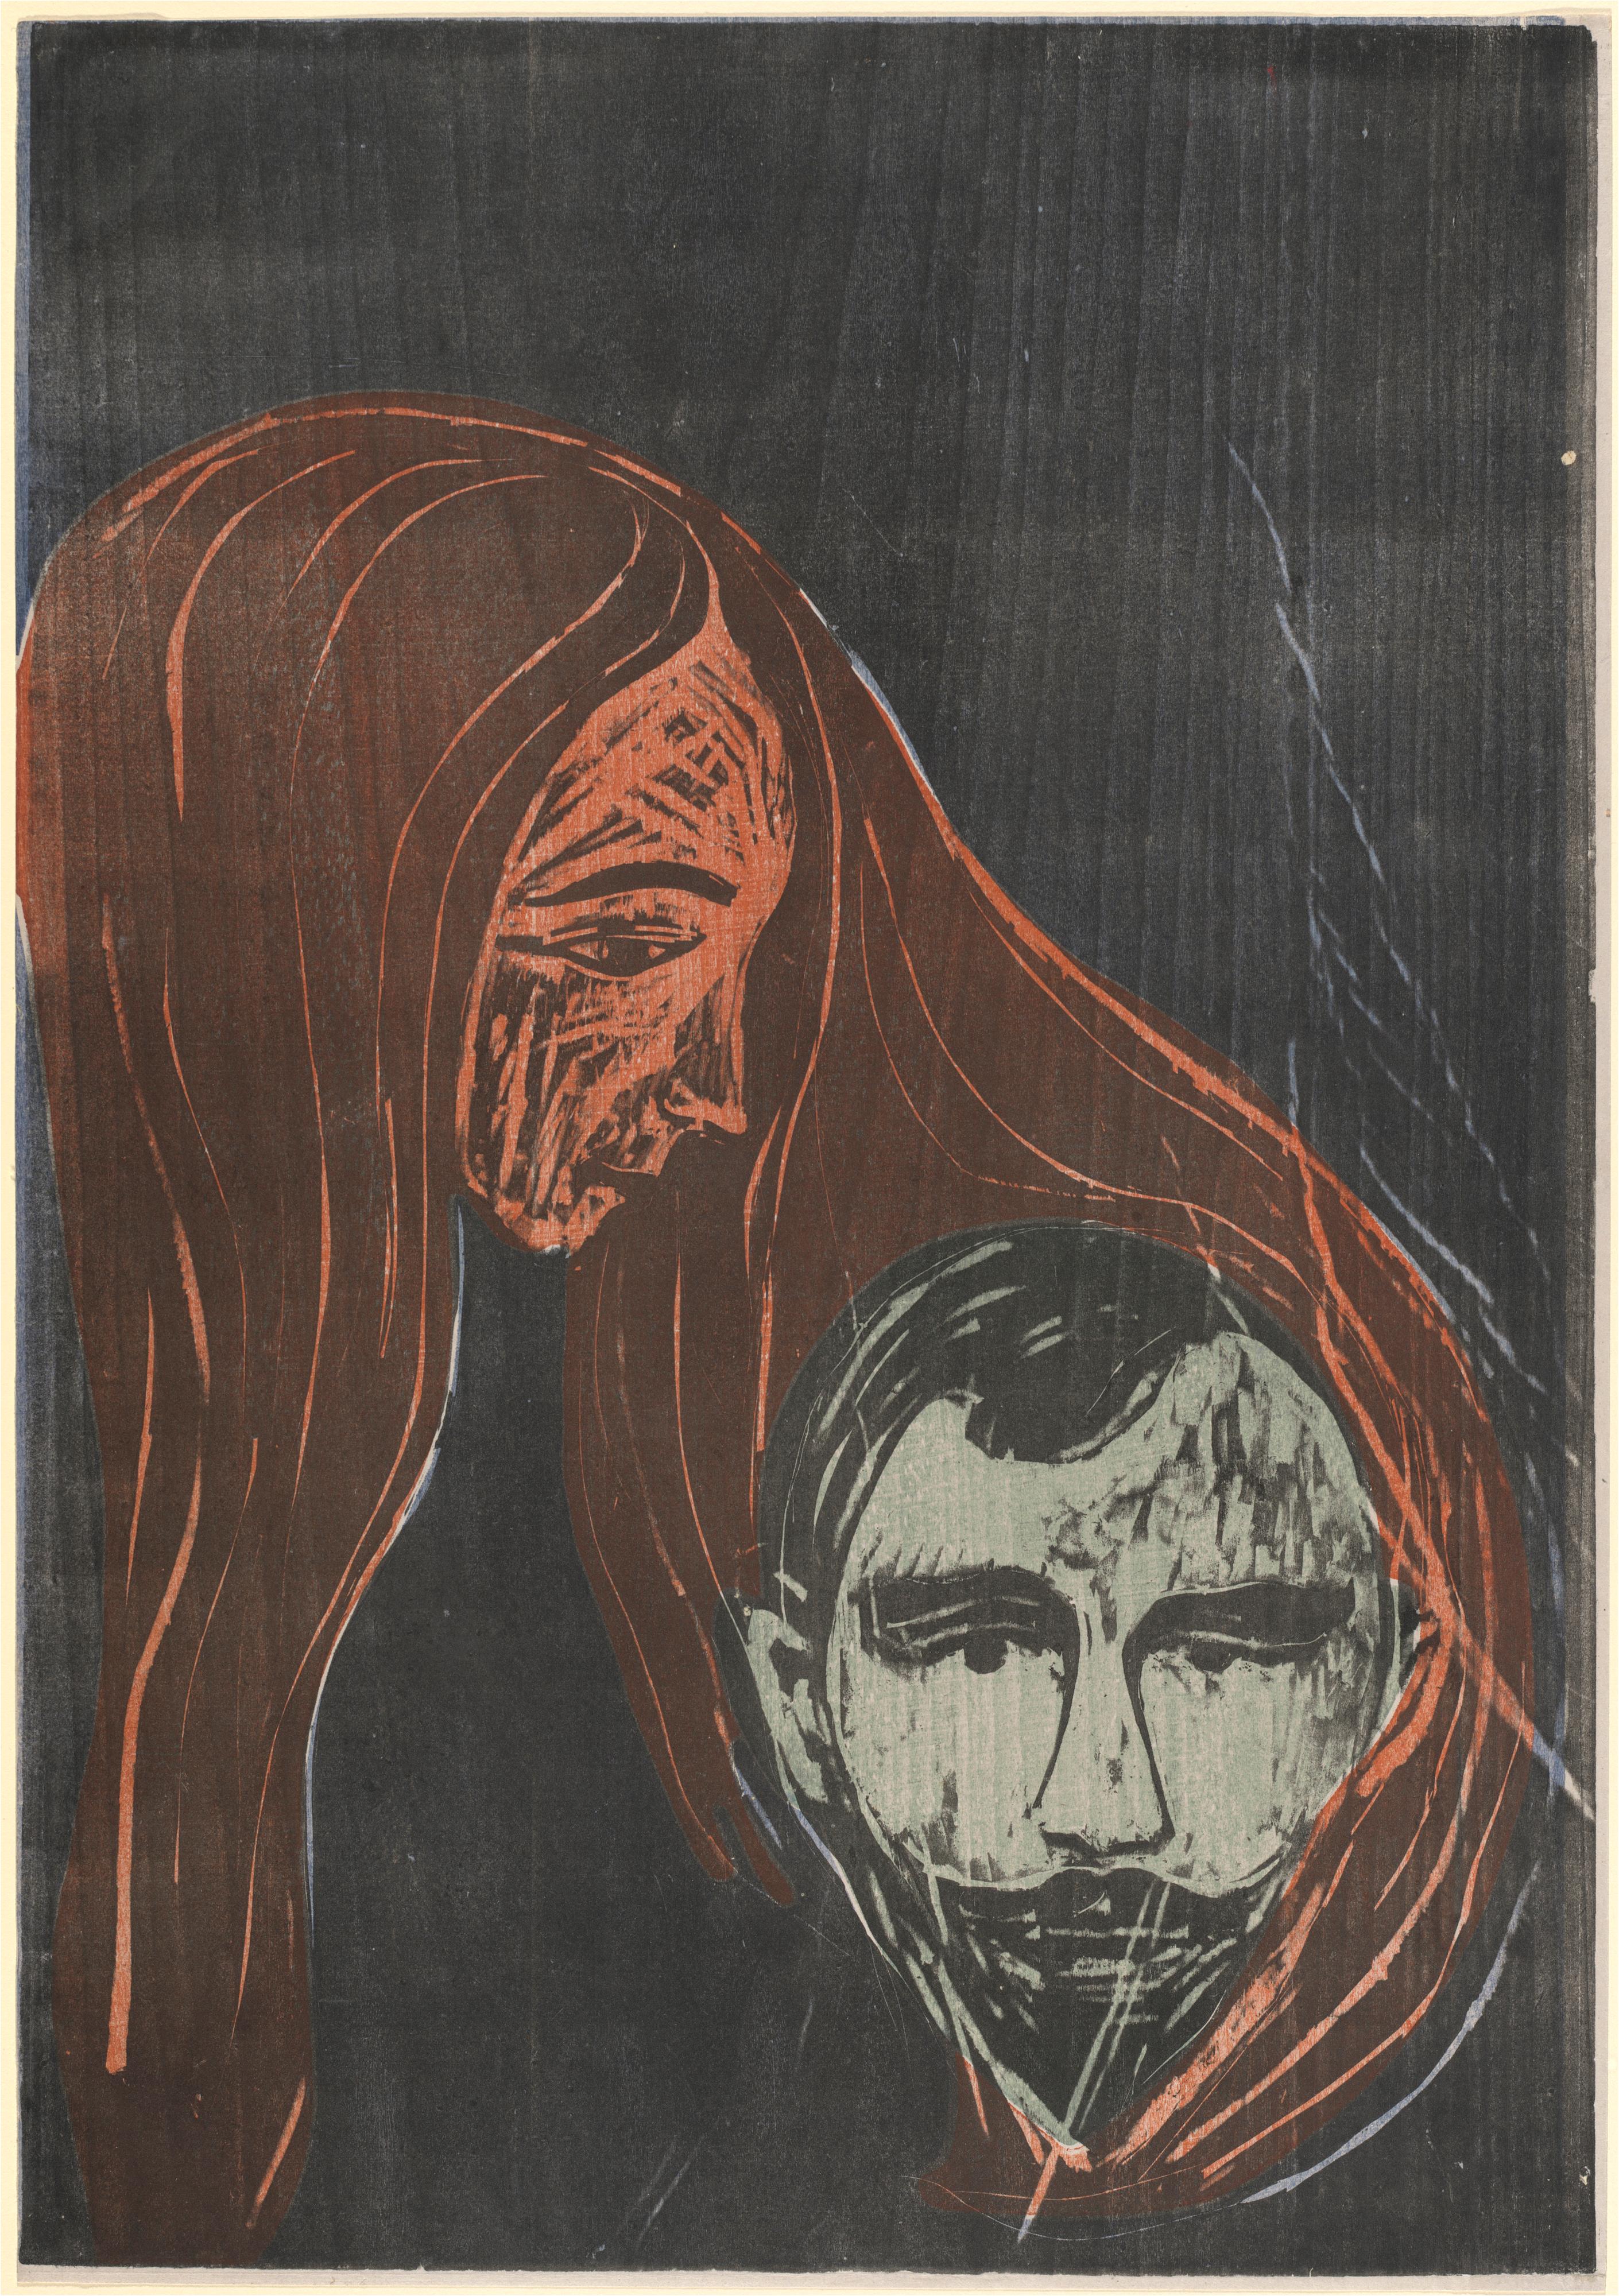 Did Edvard Munch Find a Supernatural Power in Color?